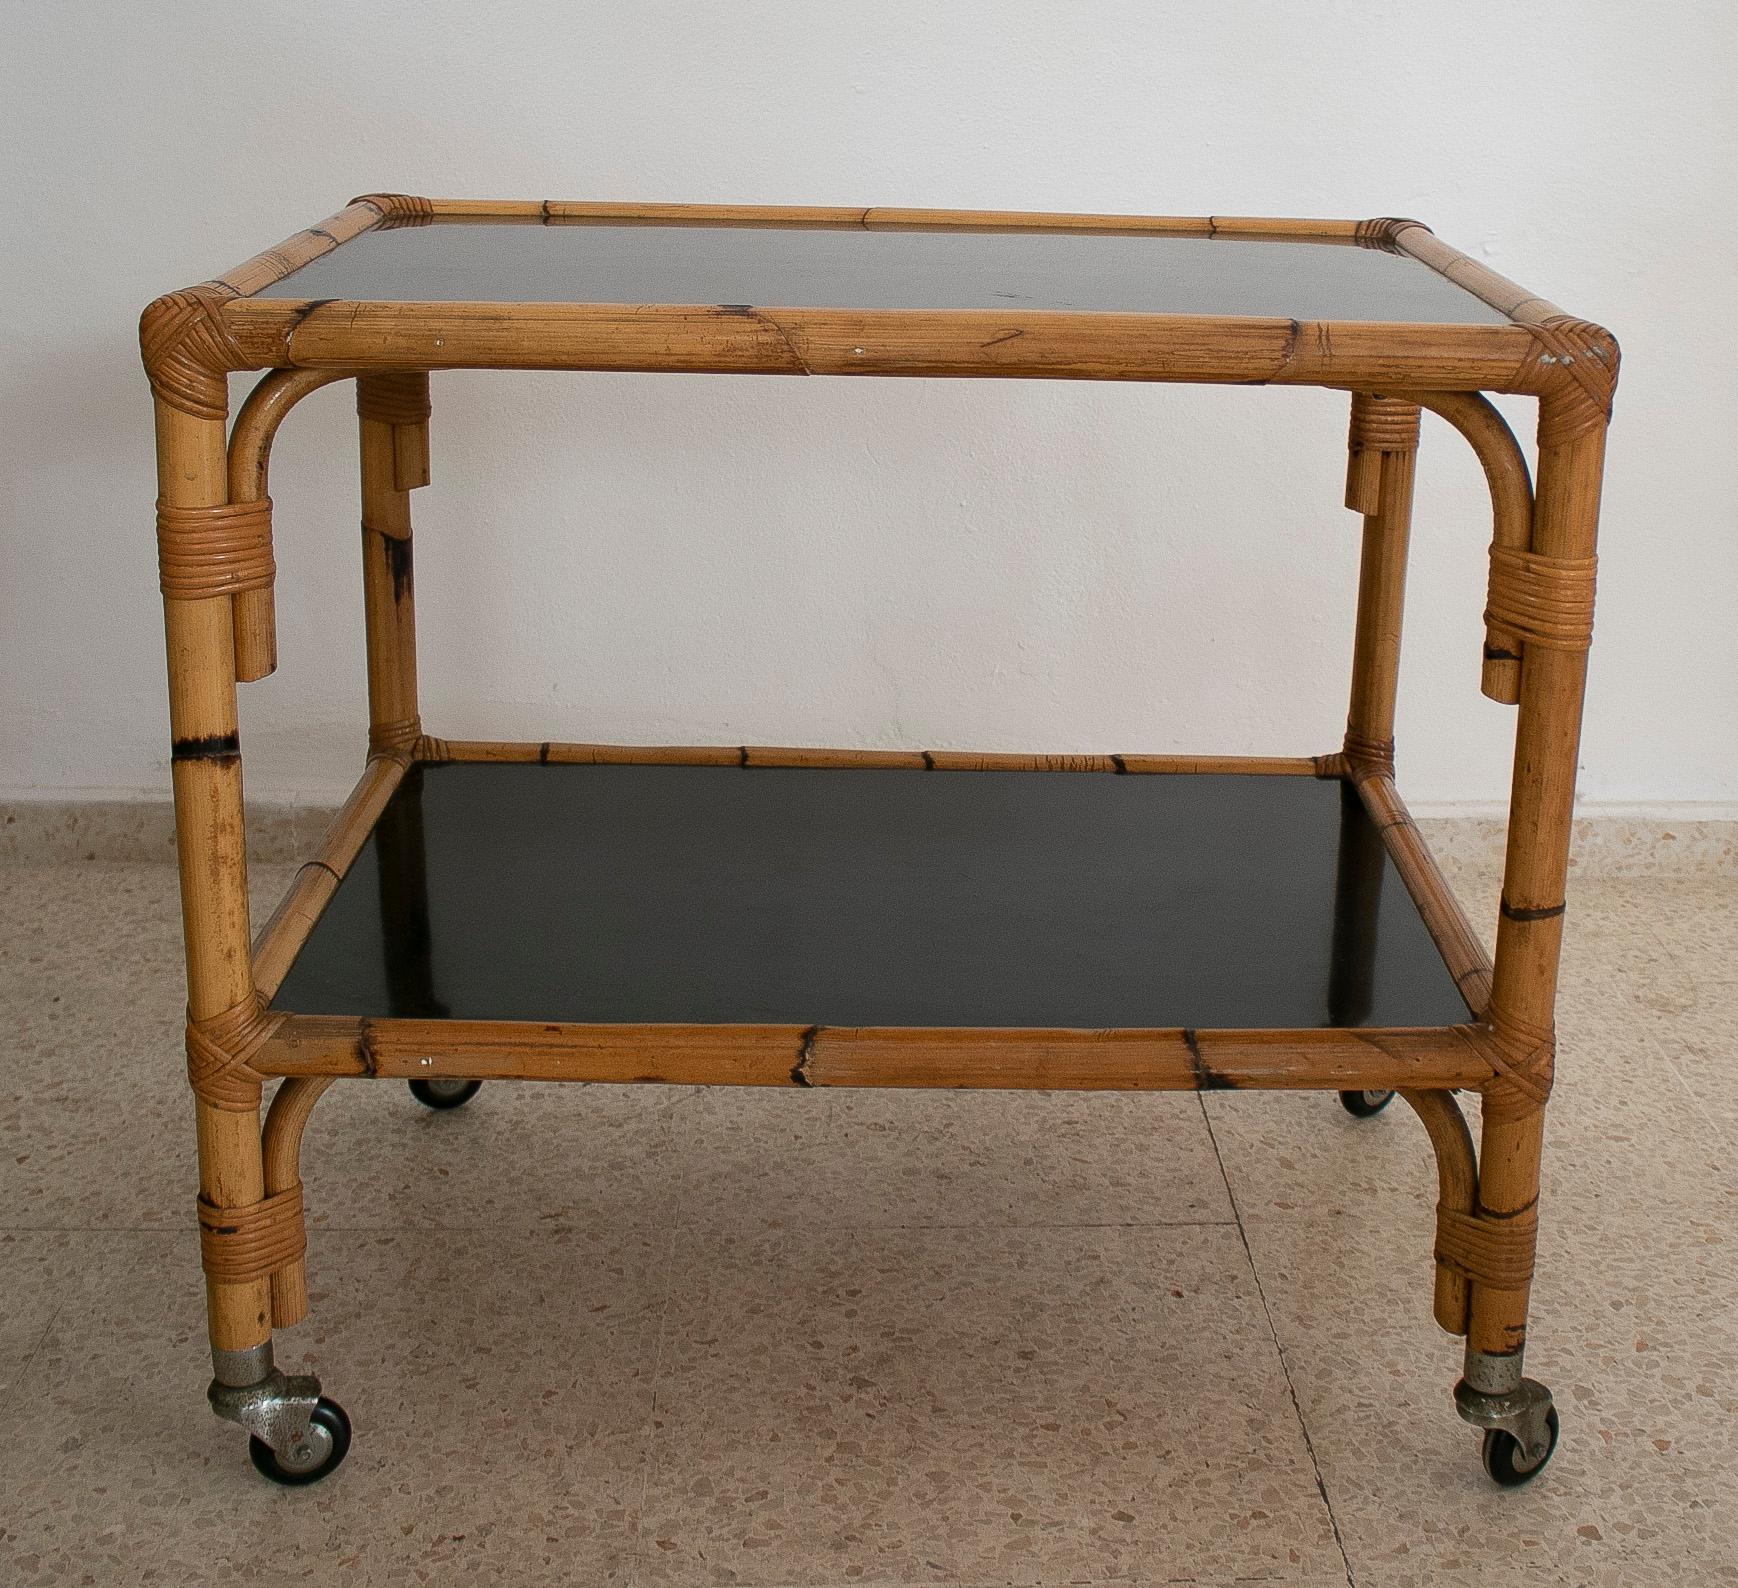 Vintage 1970s Spanish bamboo 2-shelves trolley with smoked glass panels.